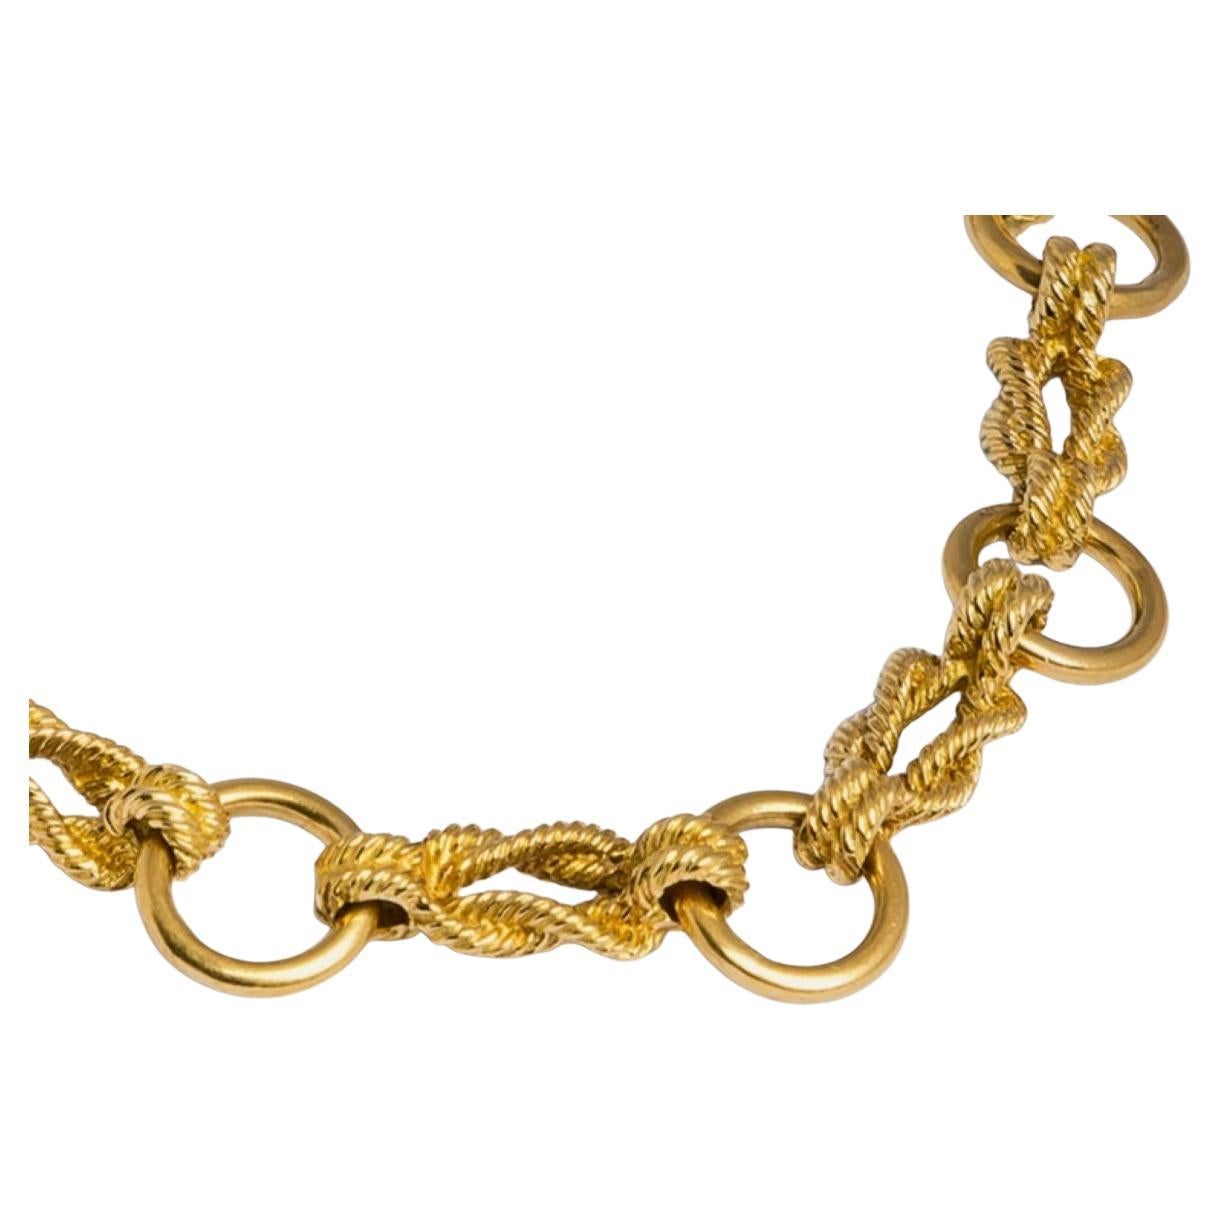 A rare, incredible chic vintage Hermès “Audierne”  chain rope 18 karat yellow gold link bracelet.

The piece is composed of nine circular links, connected by the iconic Hermès knot motif that evokes luxury. Each connecting rope has been beautifully